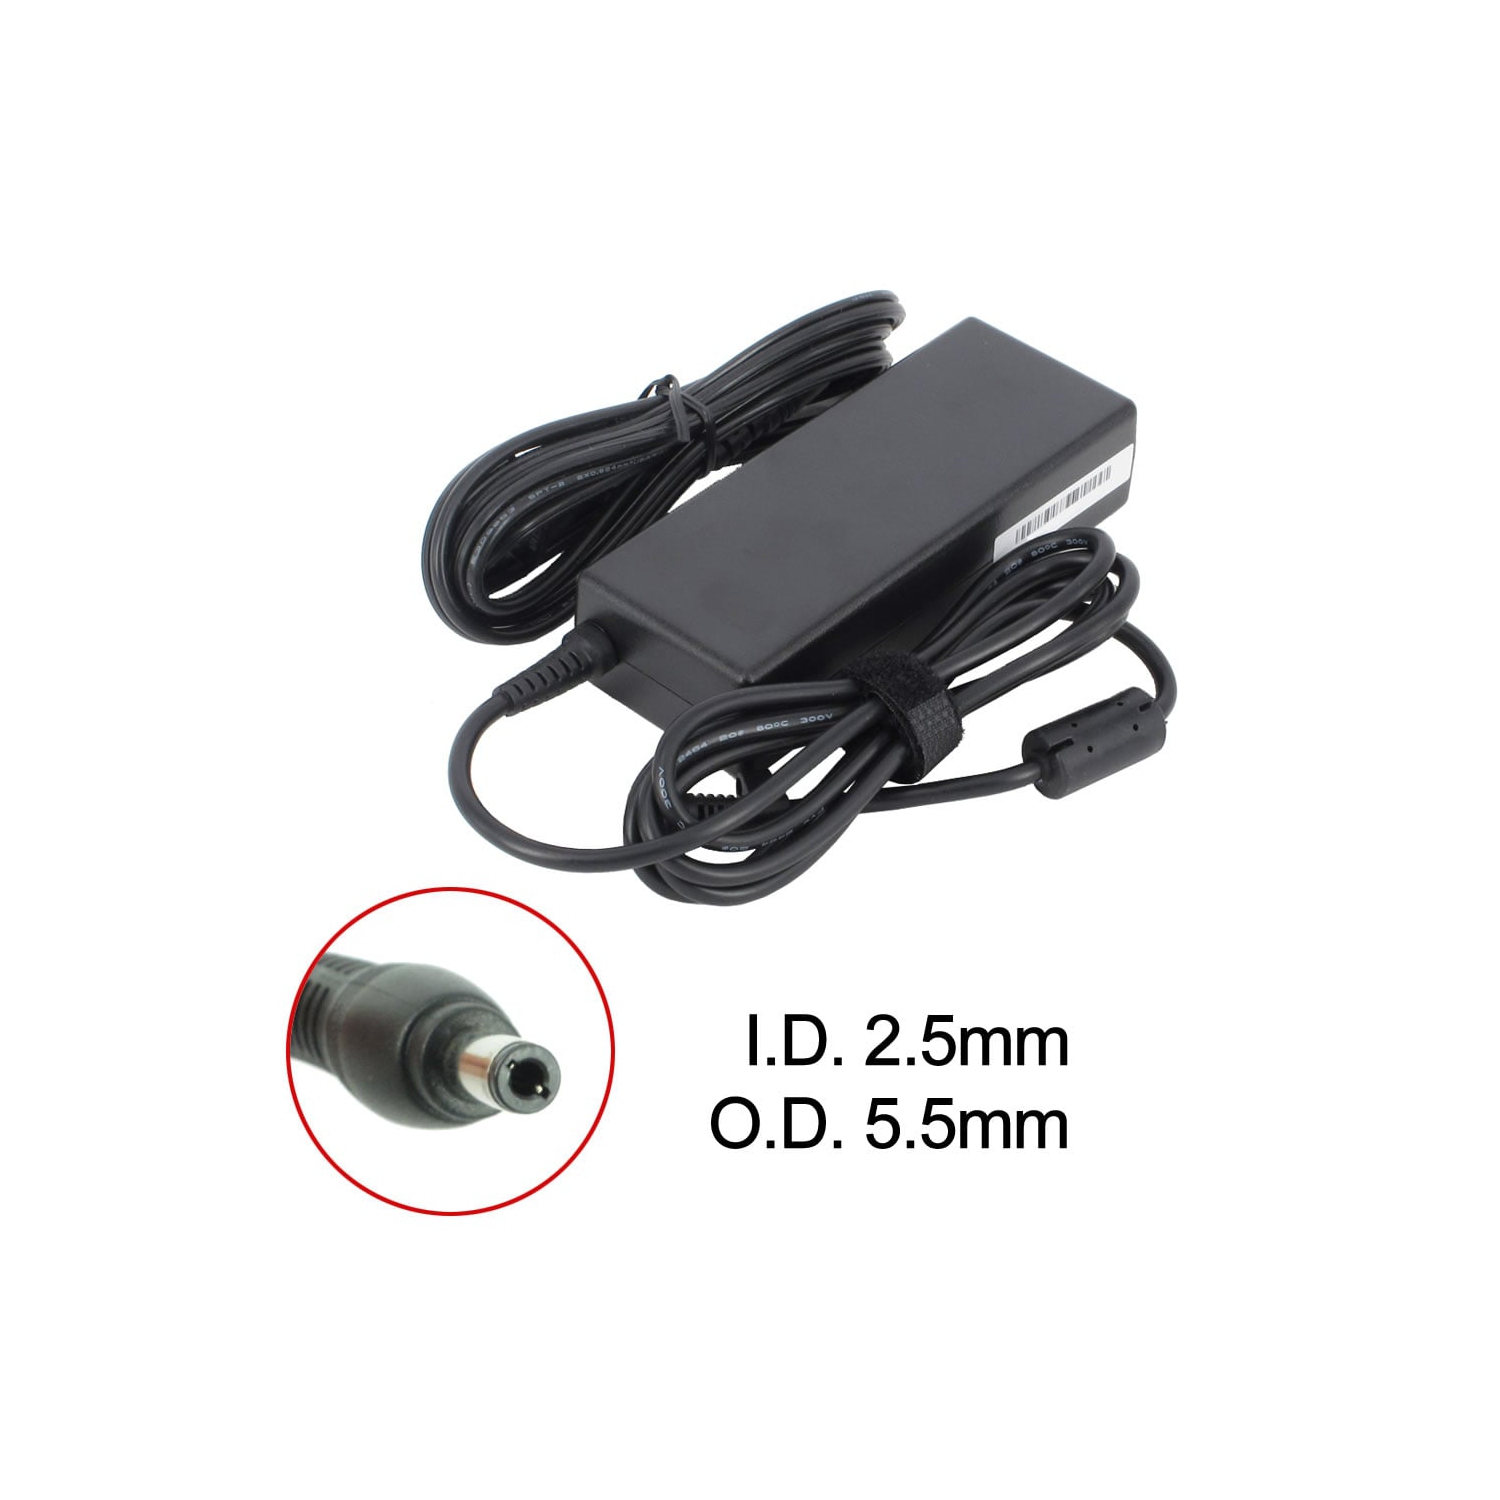 BATTDEPOT New Laptop AC Adapter for NEC LC900/2D 103942 808-875692-010A 9T458 ADP-65 HB BBEF PA-1900-36 SA80-3115